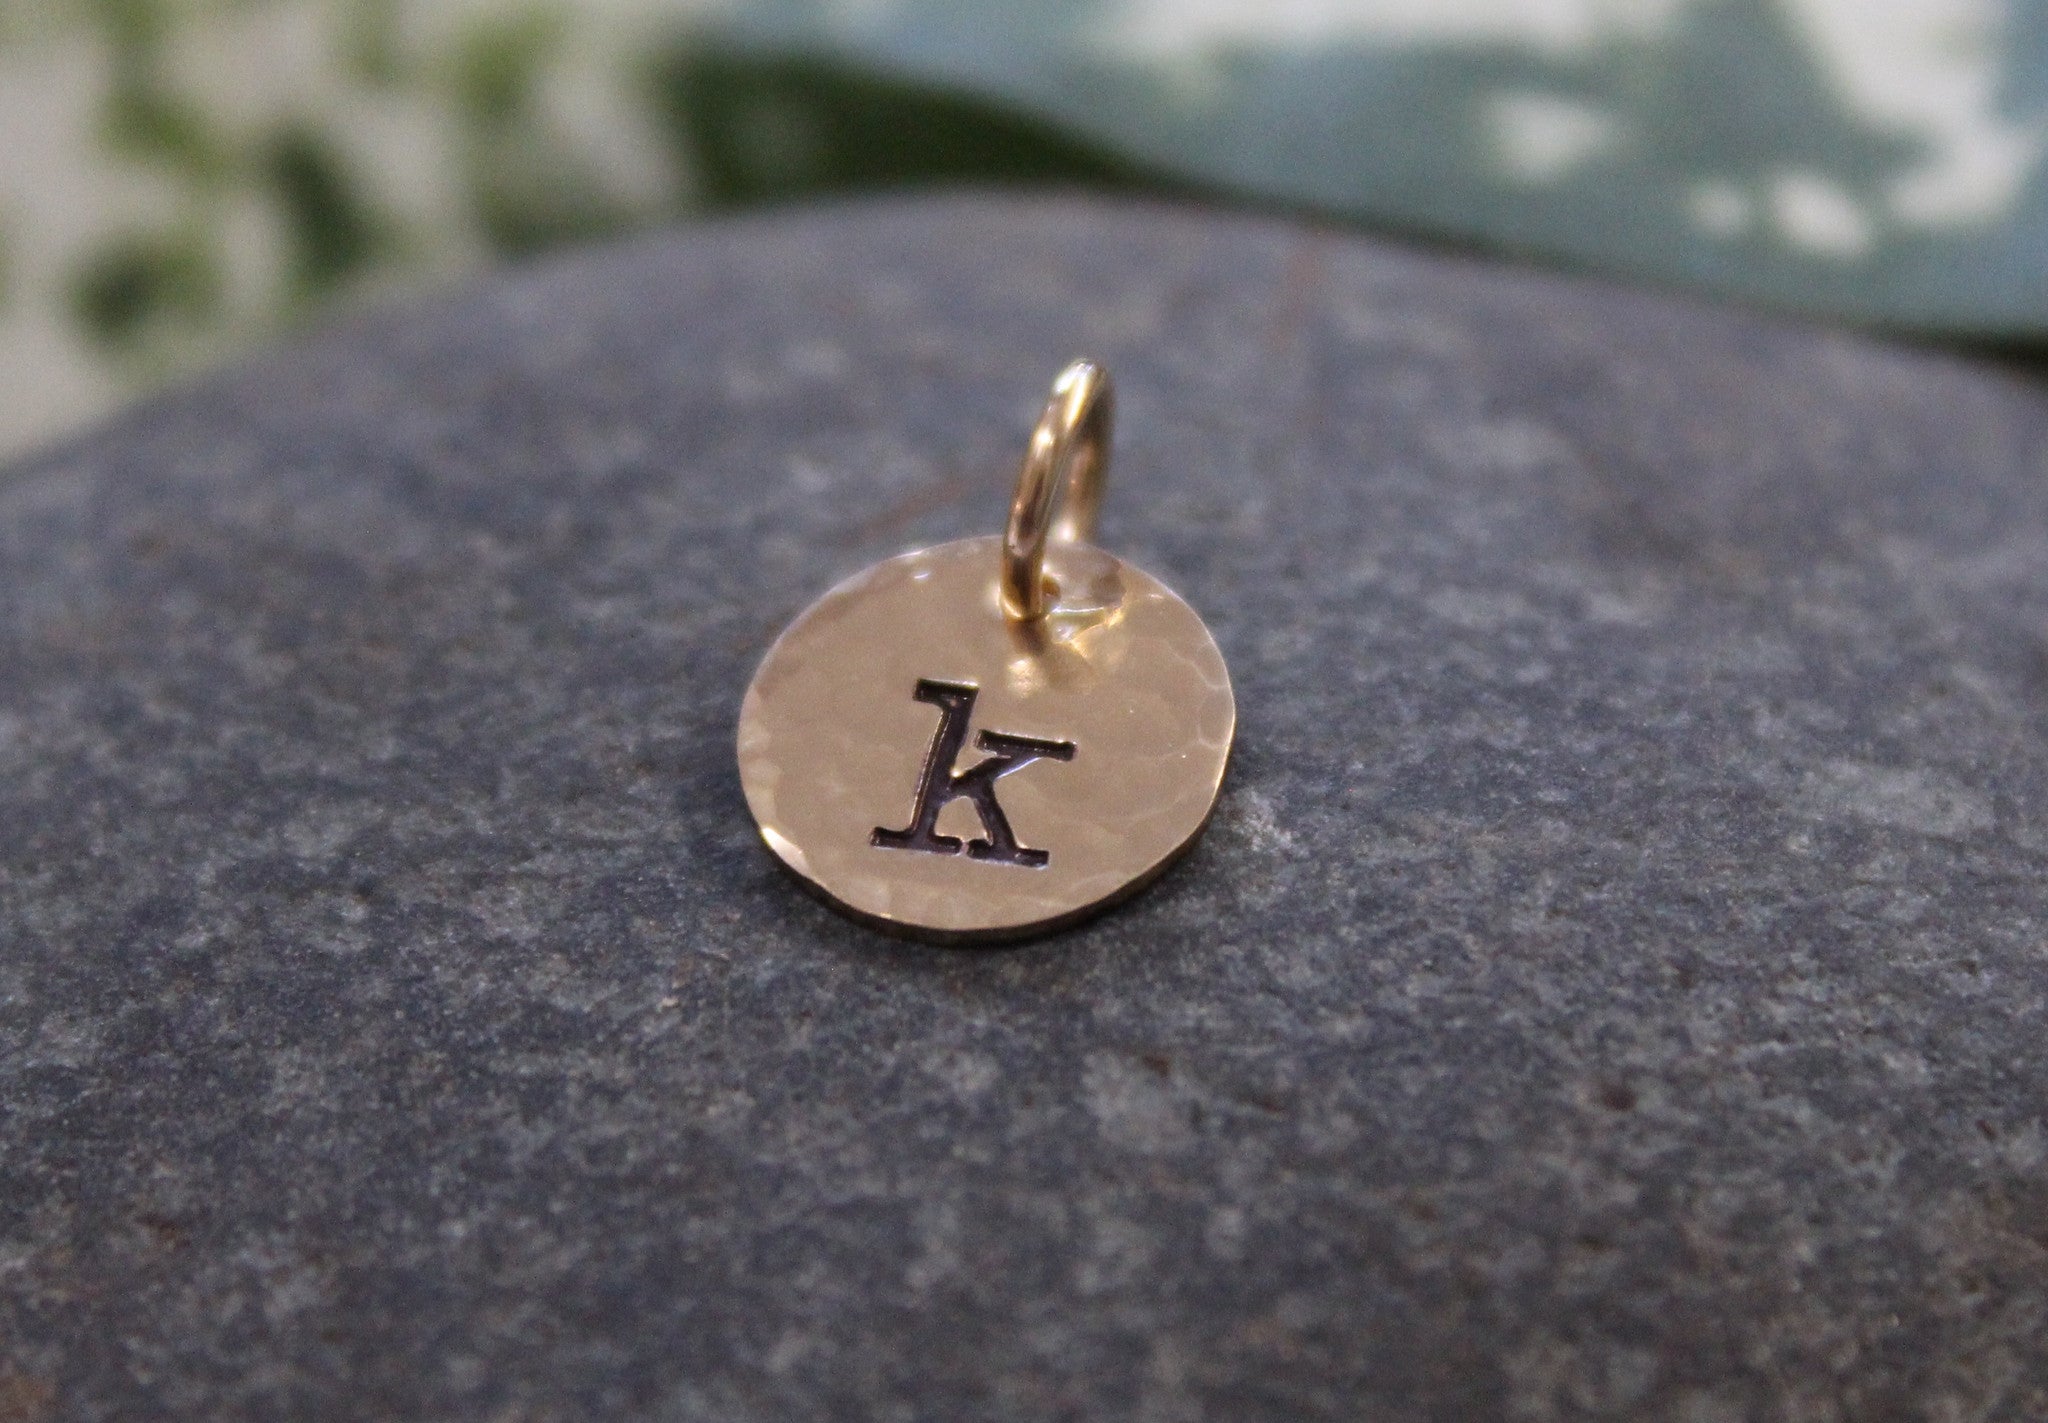 Small textured initial charm - 3/8" (9.5mm)